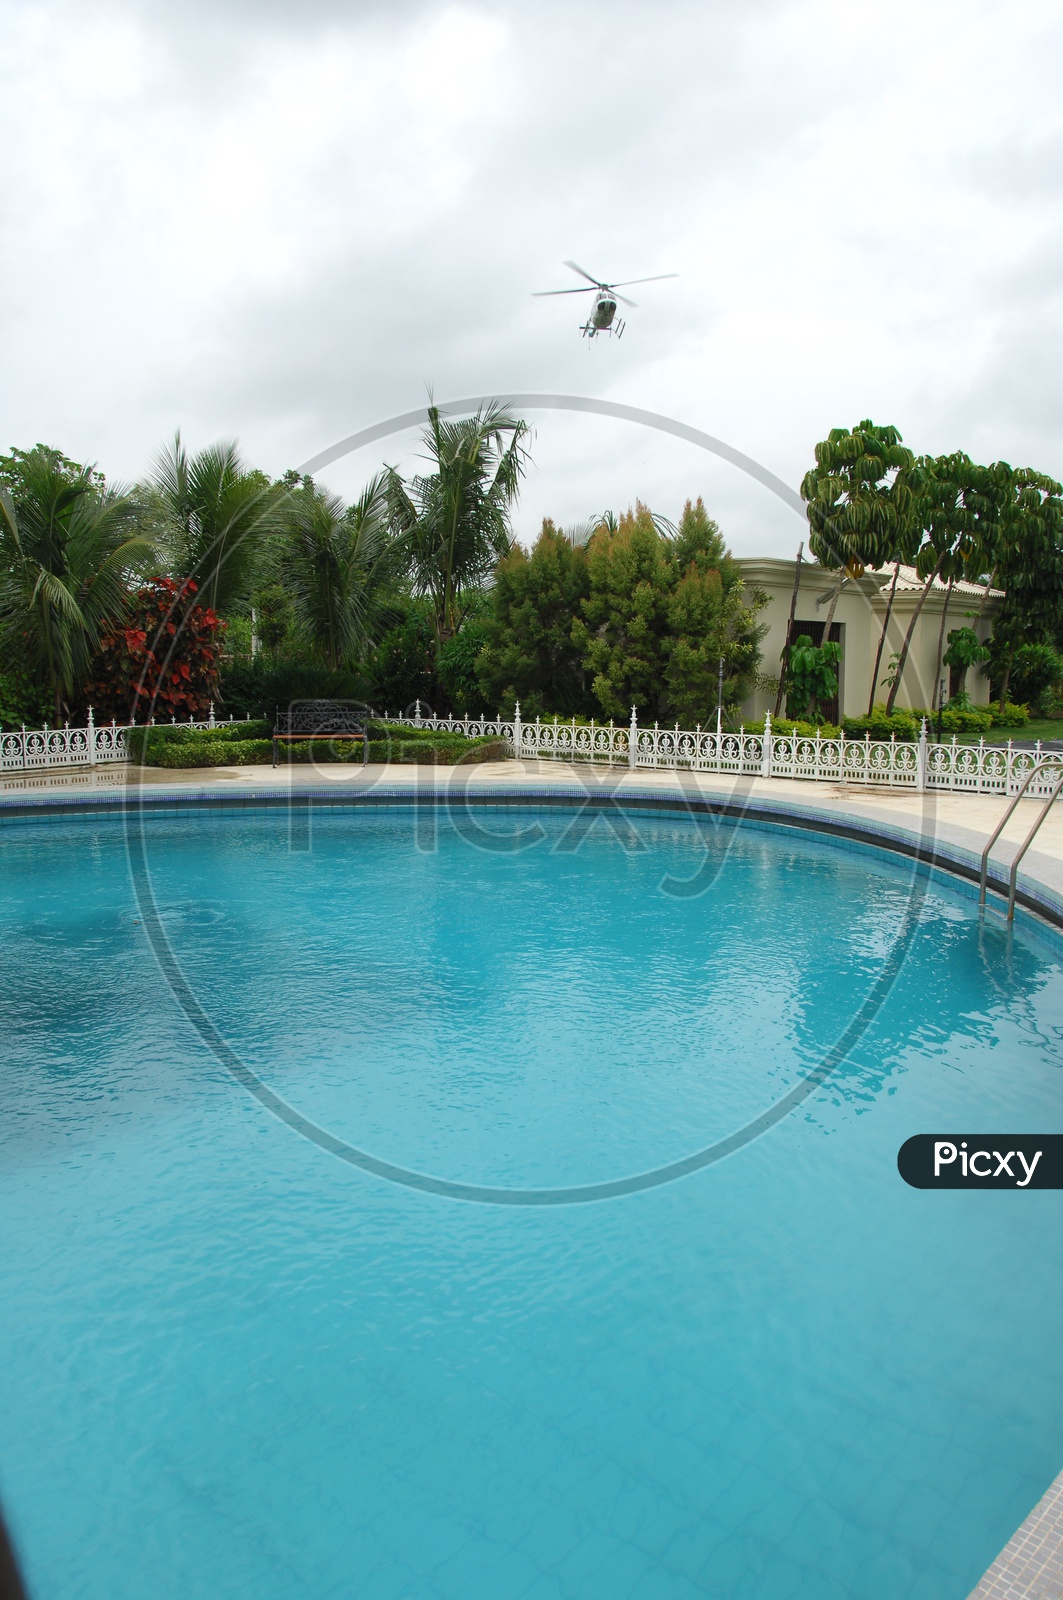 Helicopter/Aircraft over the Swimming Pool - Movie stills